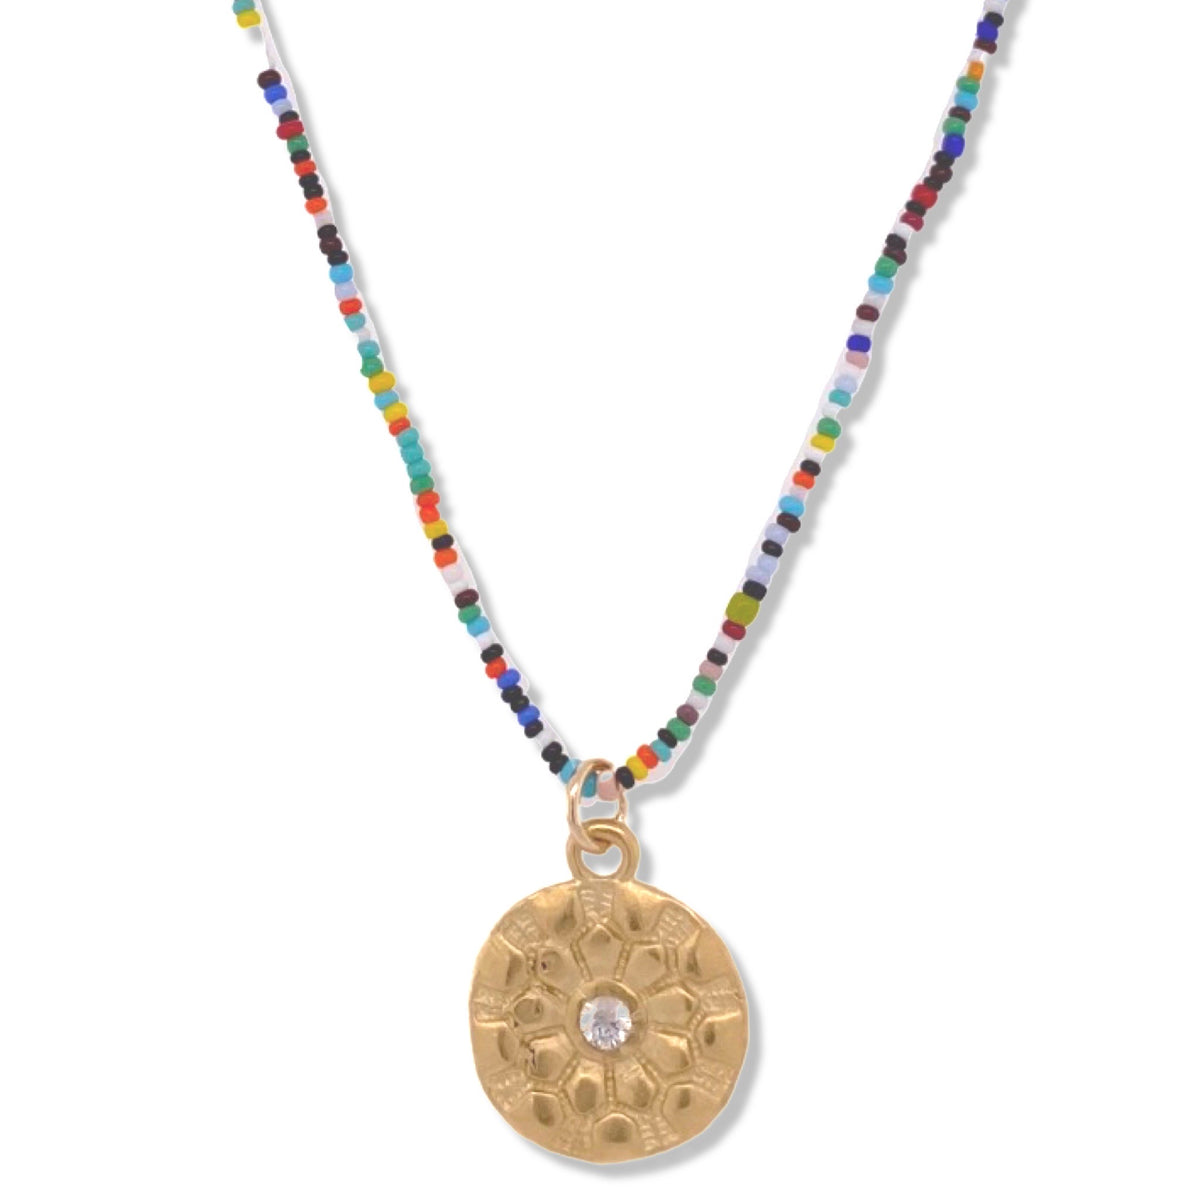 Mara Necklace in Gold on Micro Multi Color Beads | Keely Smith Jewelry | Nantucket